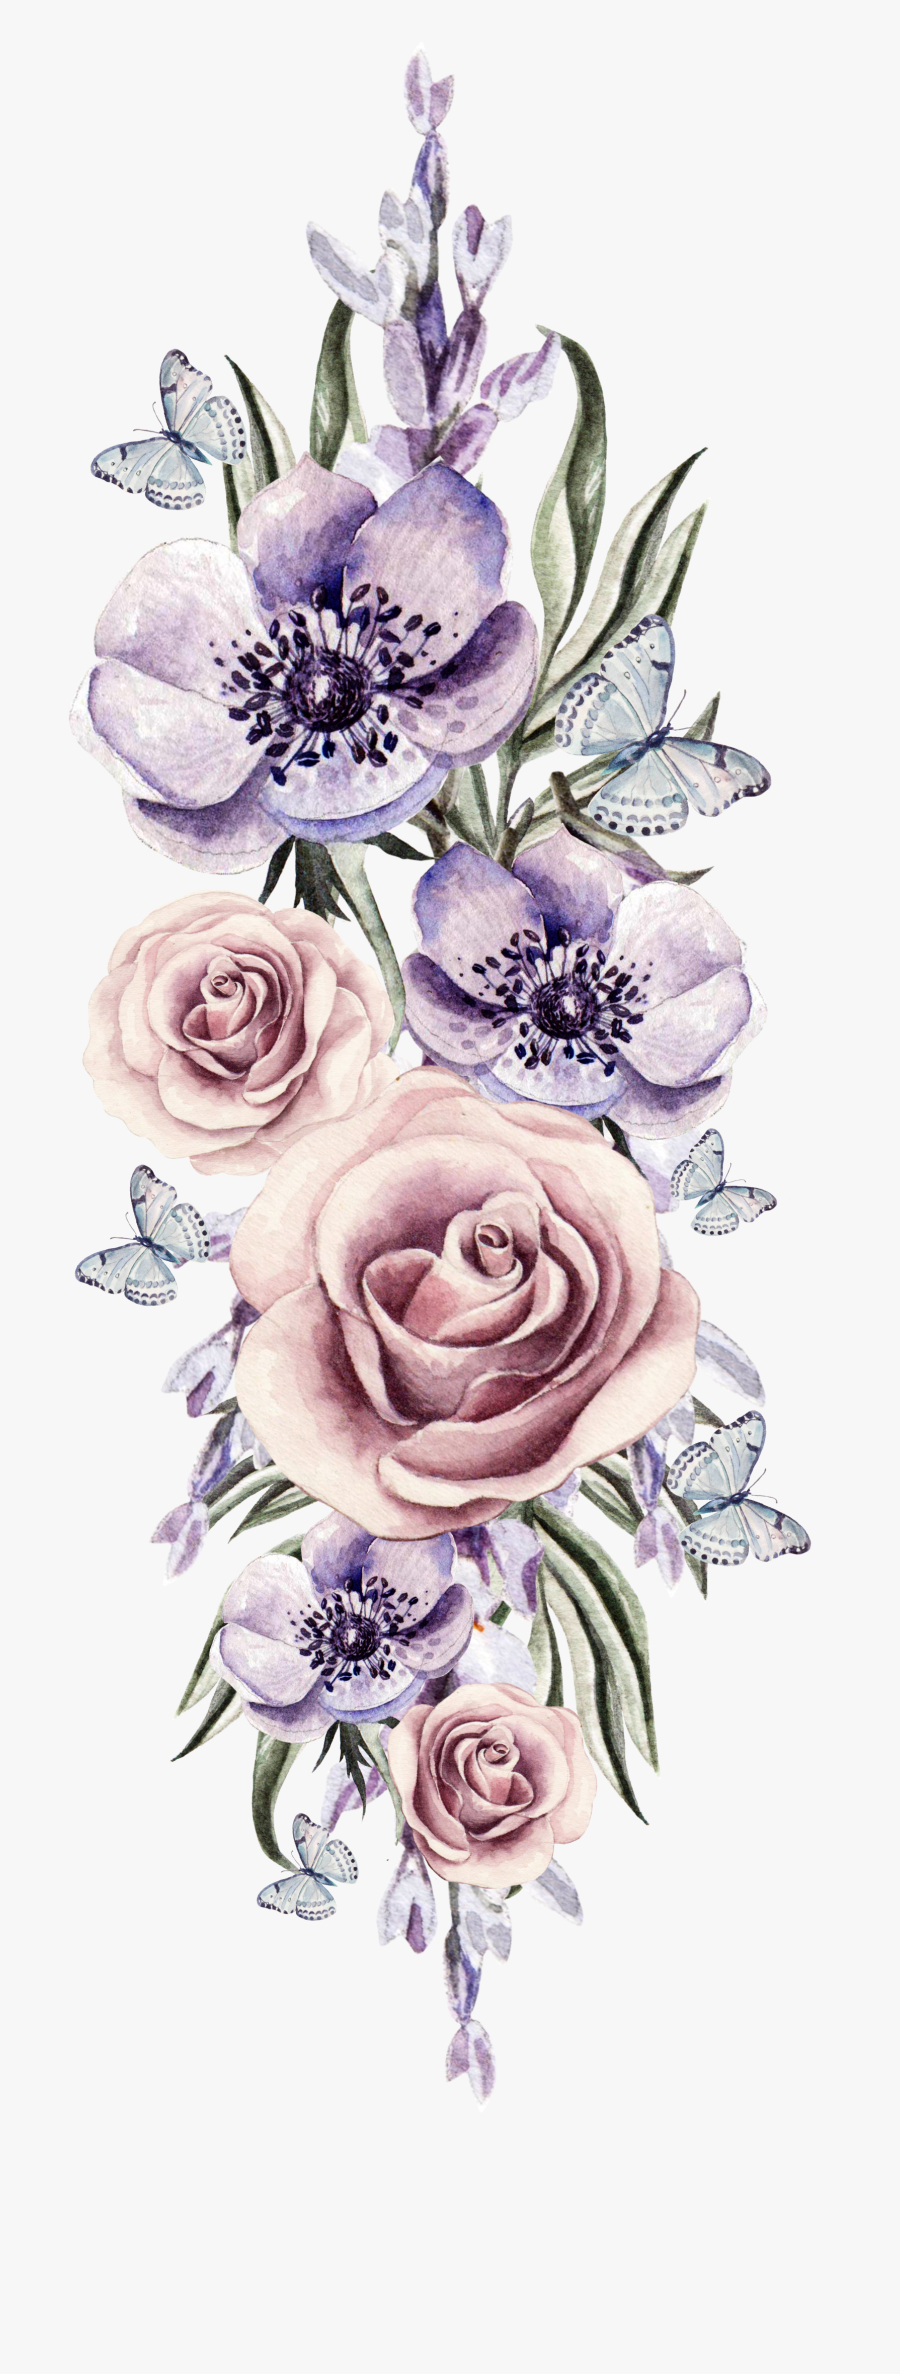 Watercolor Flower Transparent Background Png - Watercolor Flower Cluster, Transparent Clipart